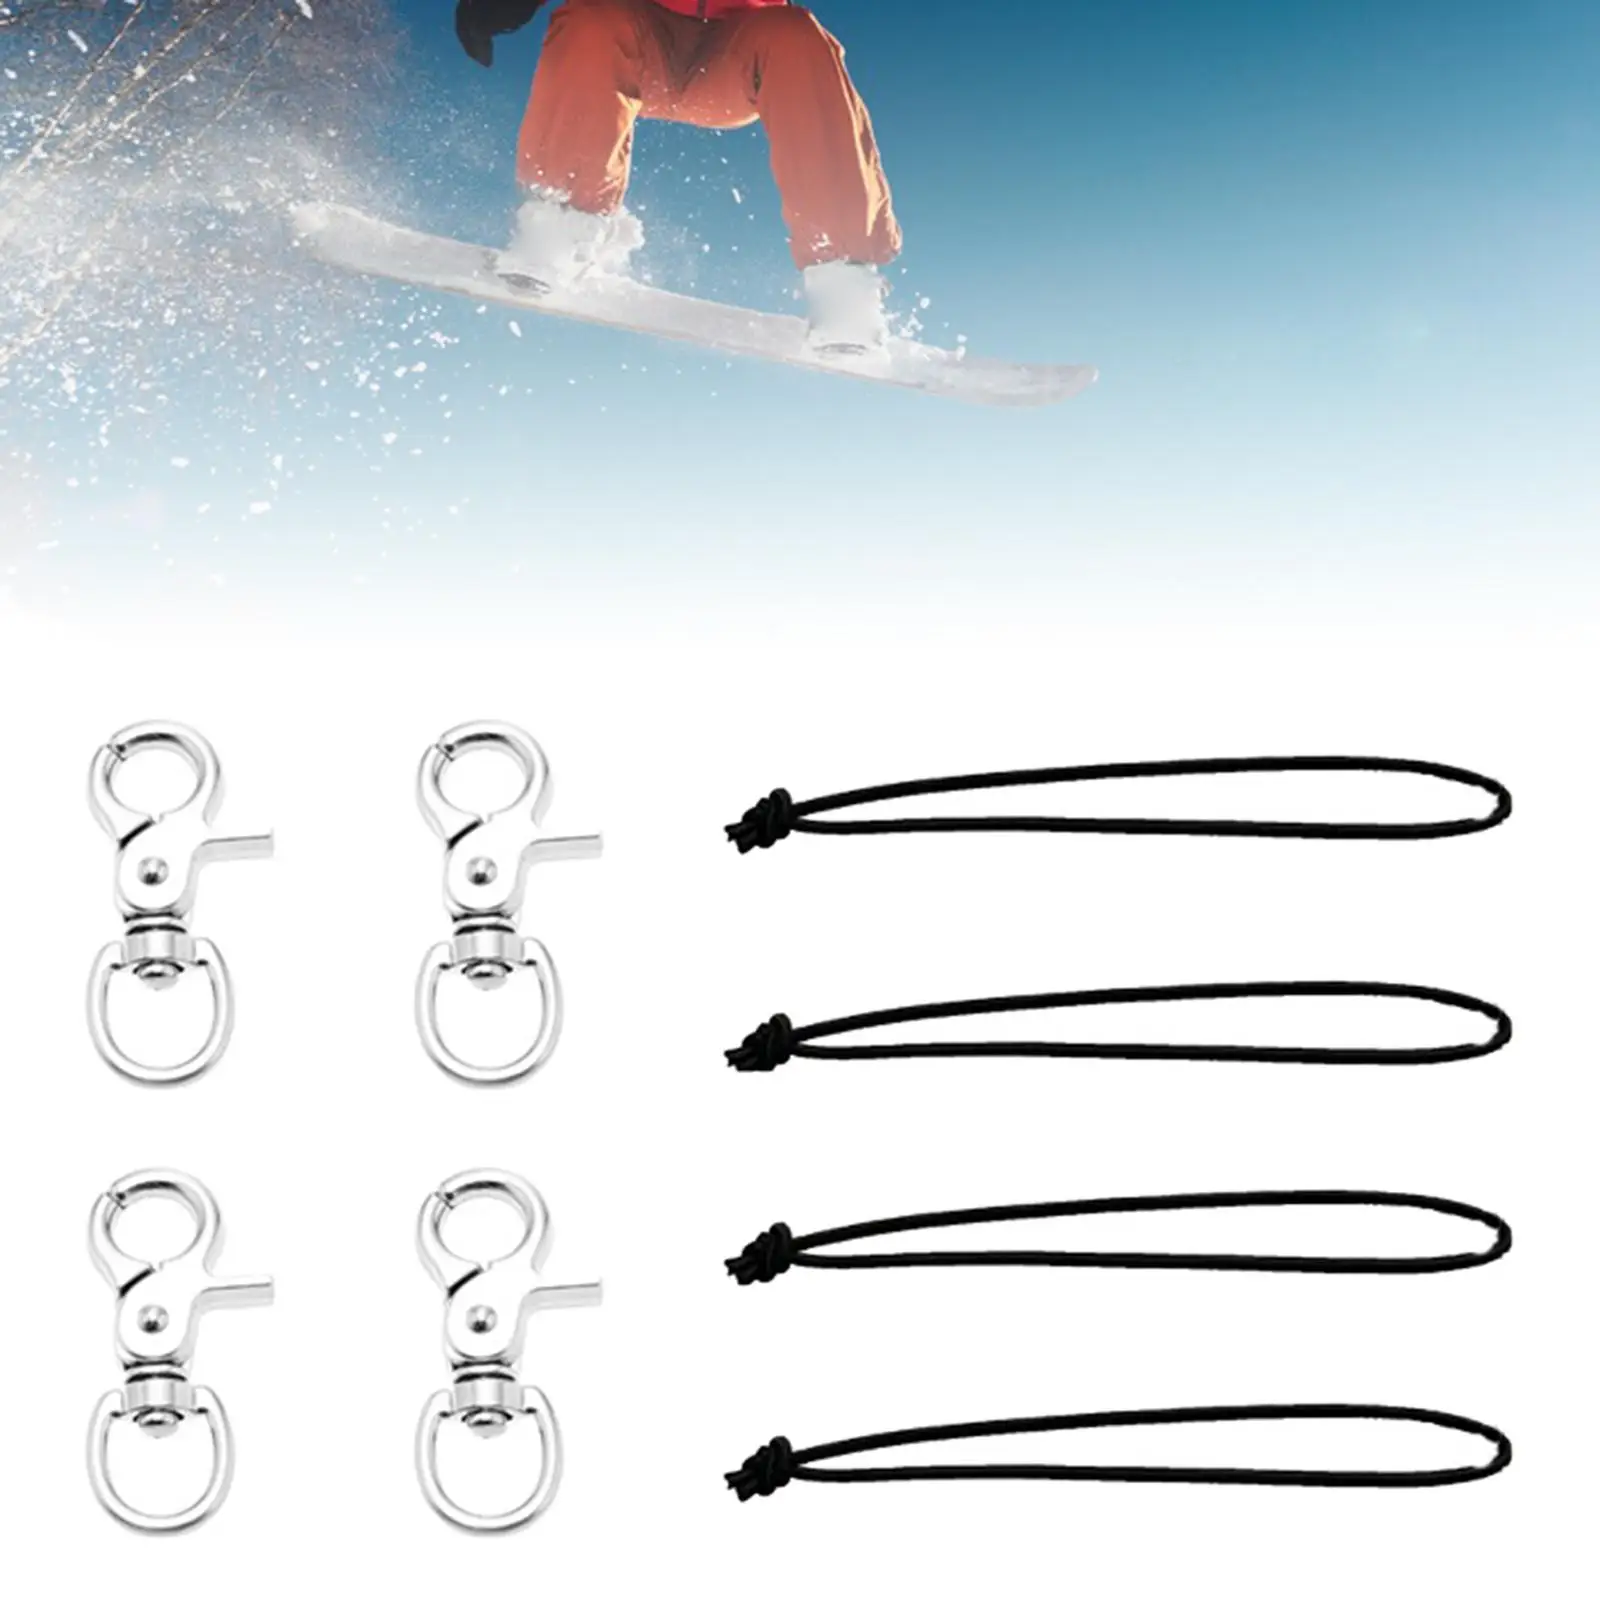 4x Practical Snowboard Leash Cord Snowboard Bindings Skiing Elastic Connecting Rope for Tents Camping Professional Curtain